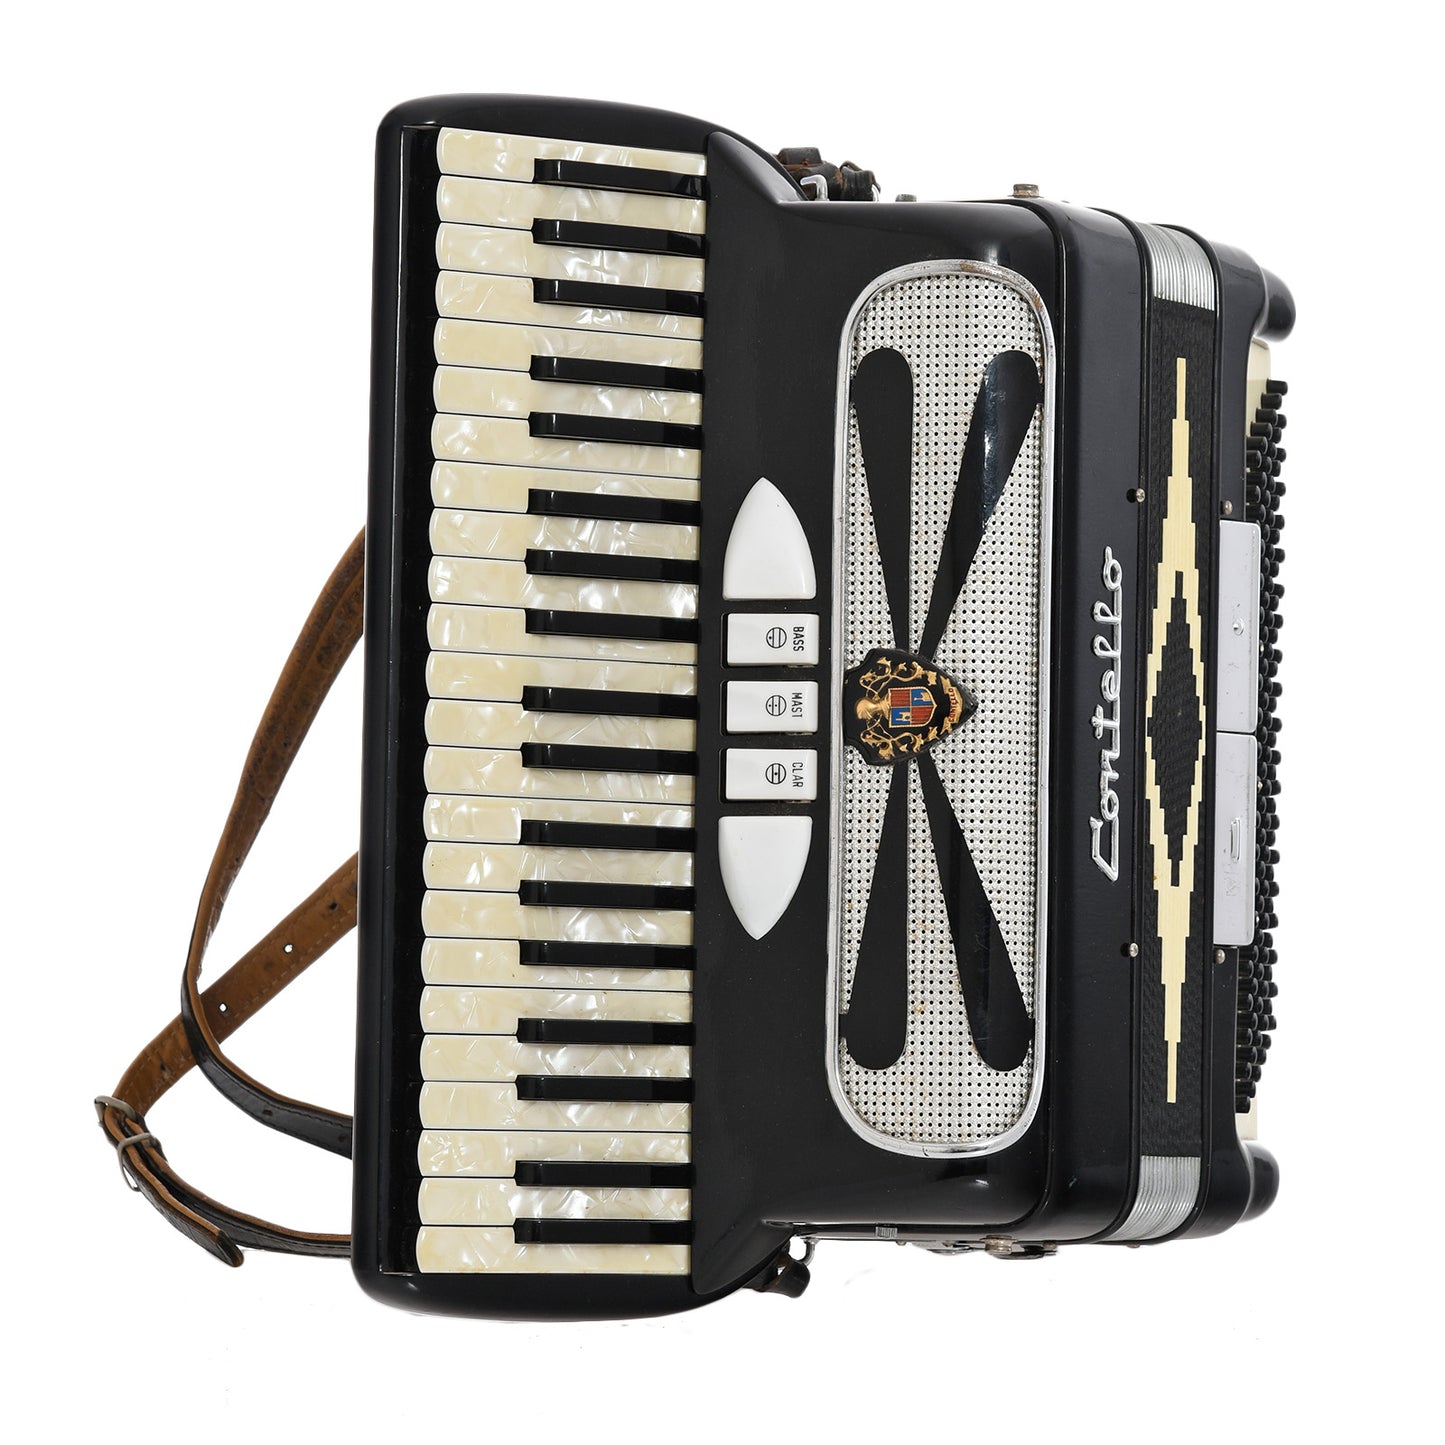 Right front side of Contello Keyboard Accordion